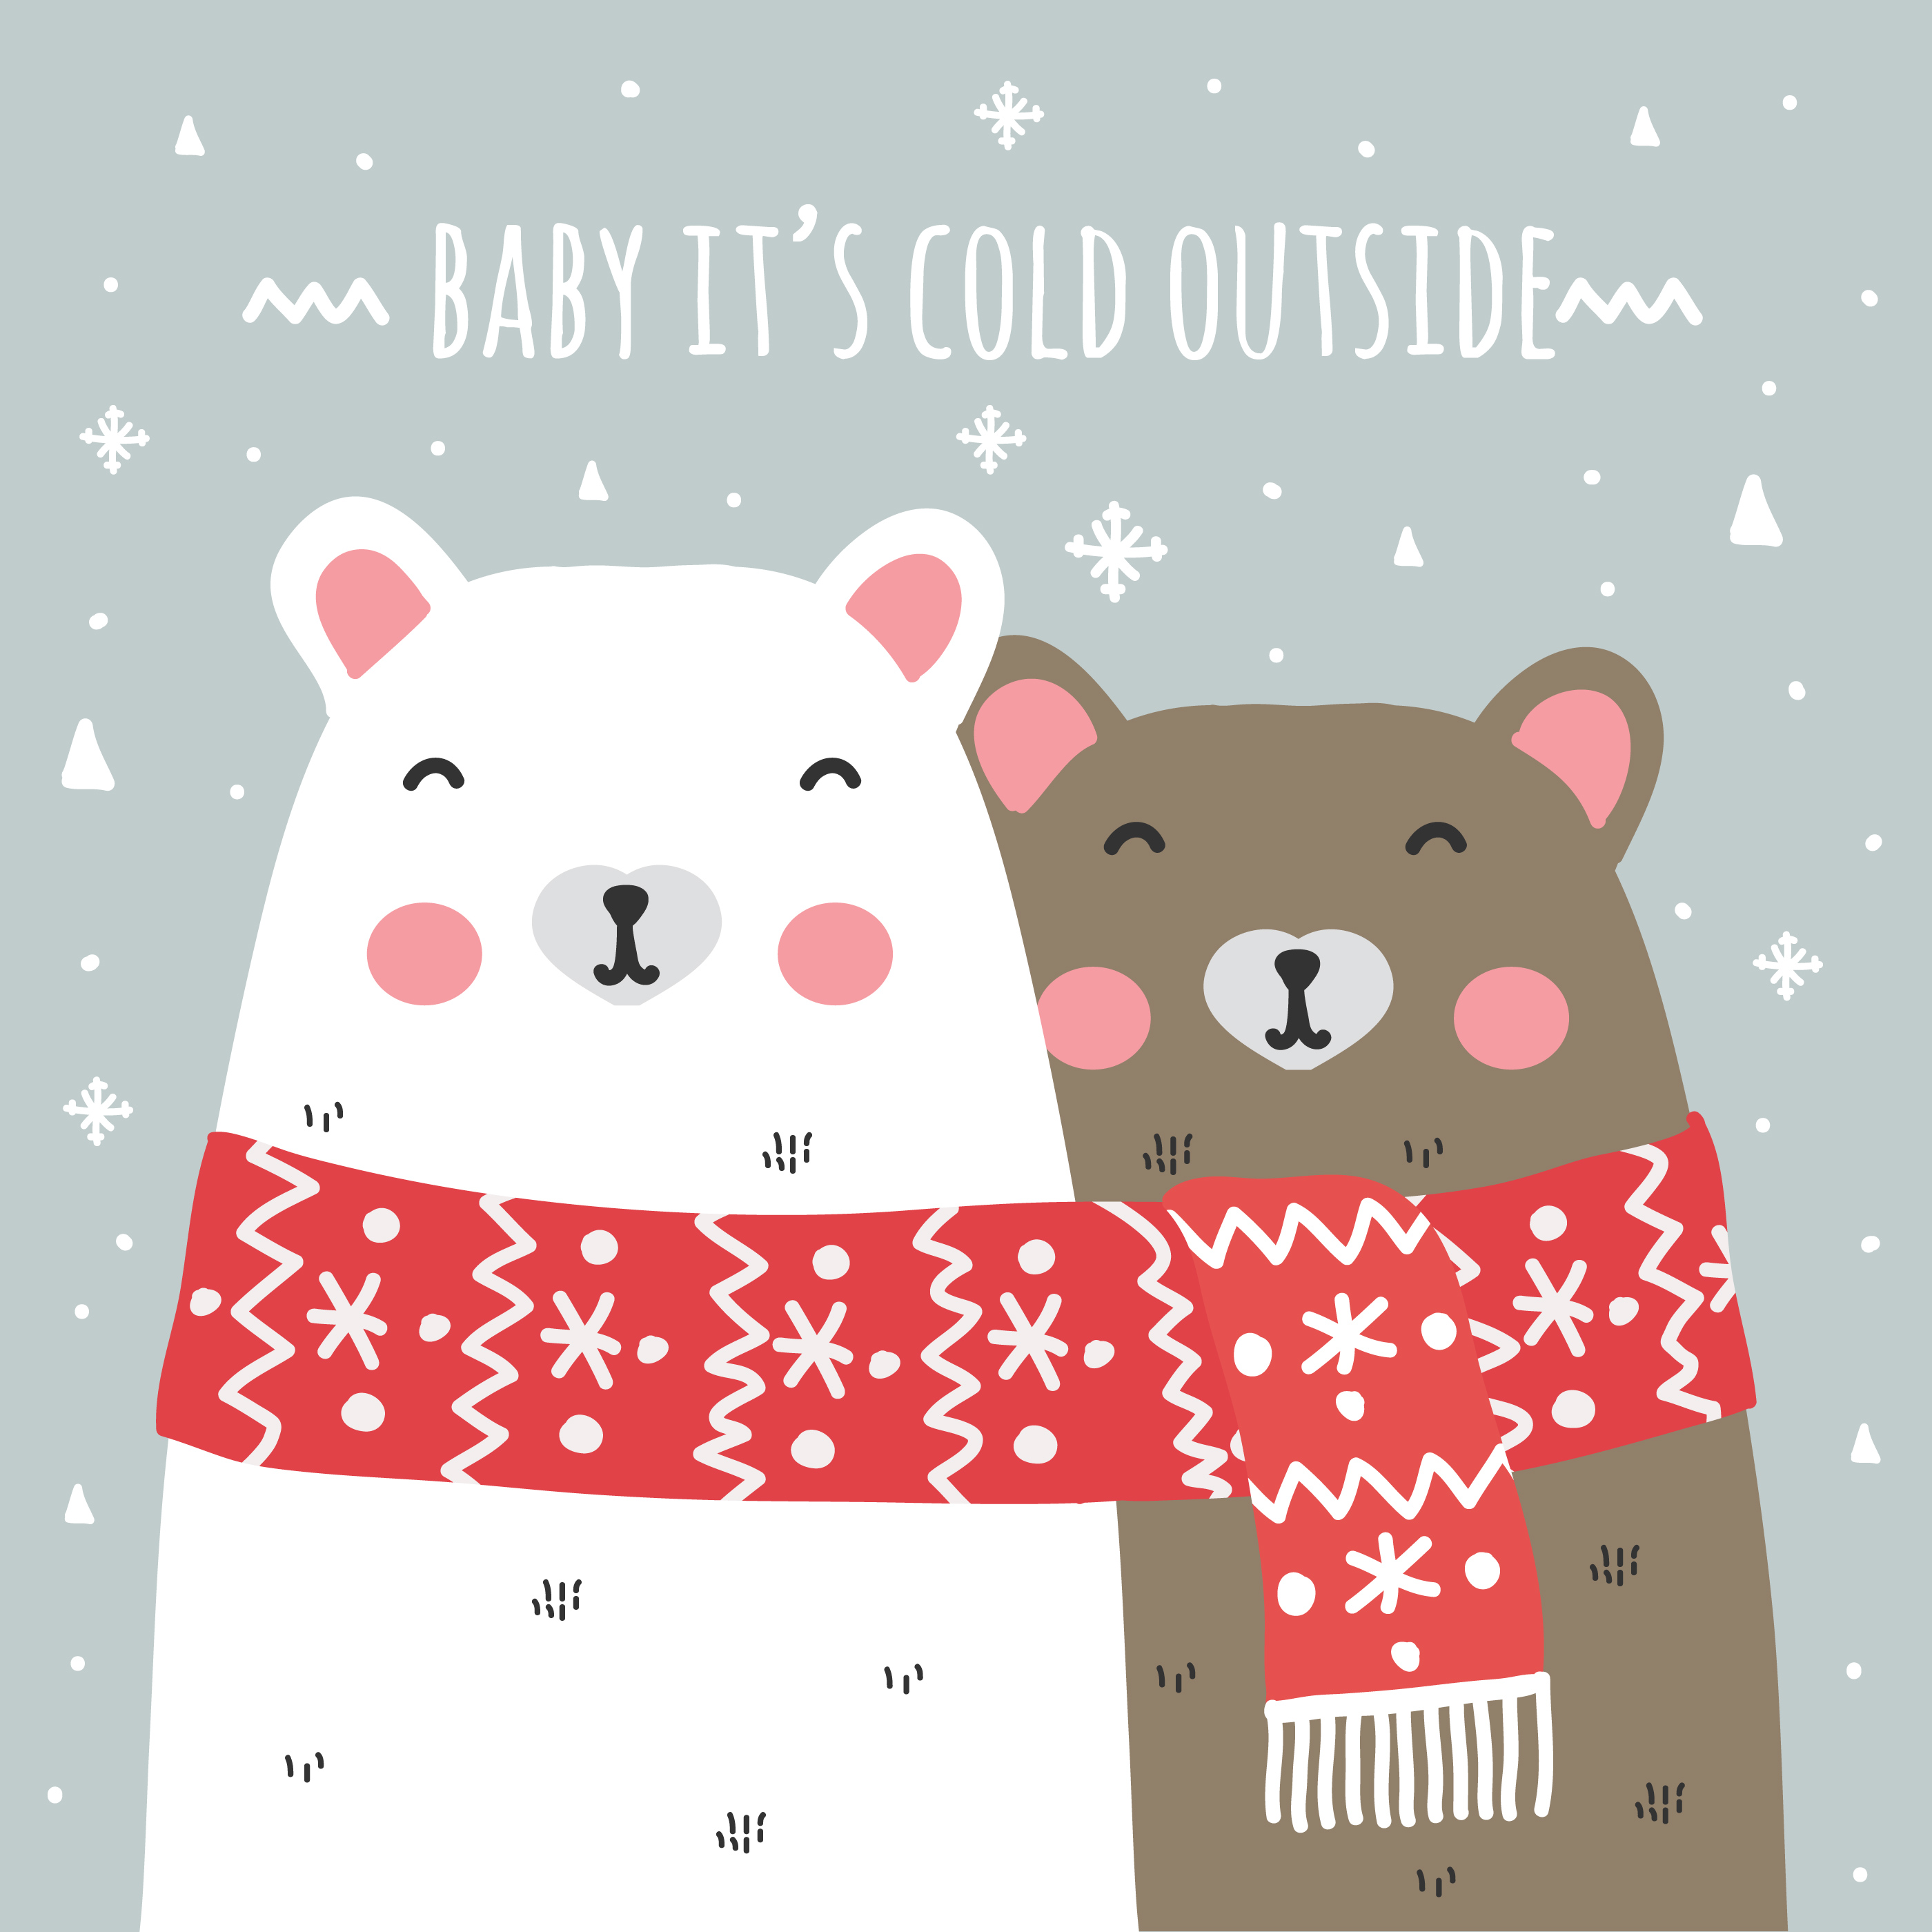 Baby It S Cold Outside Background Download Free Vectors Clipart Graphics Vector Art